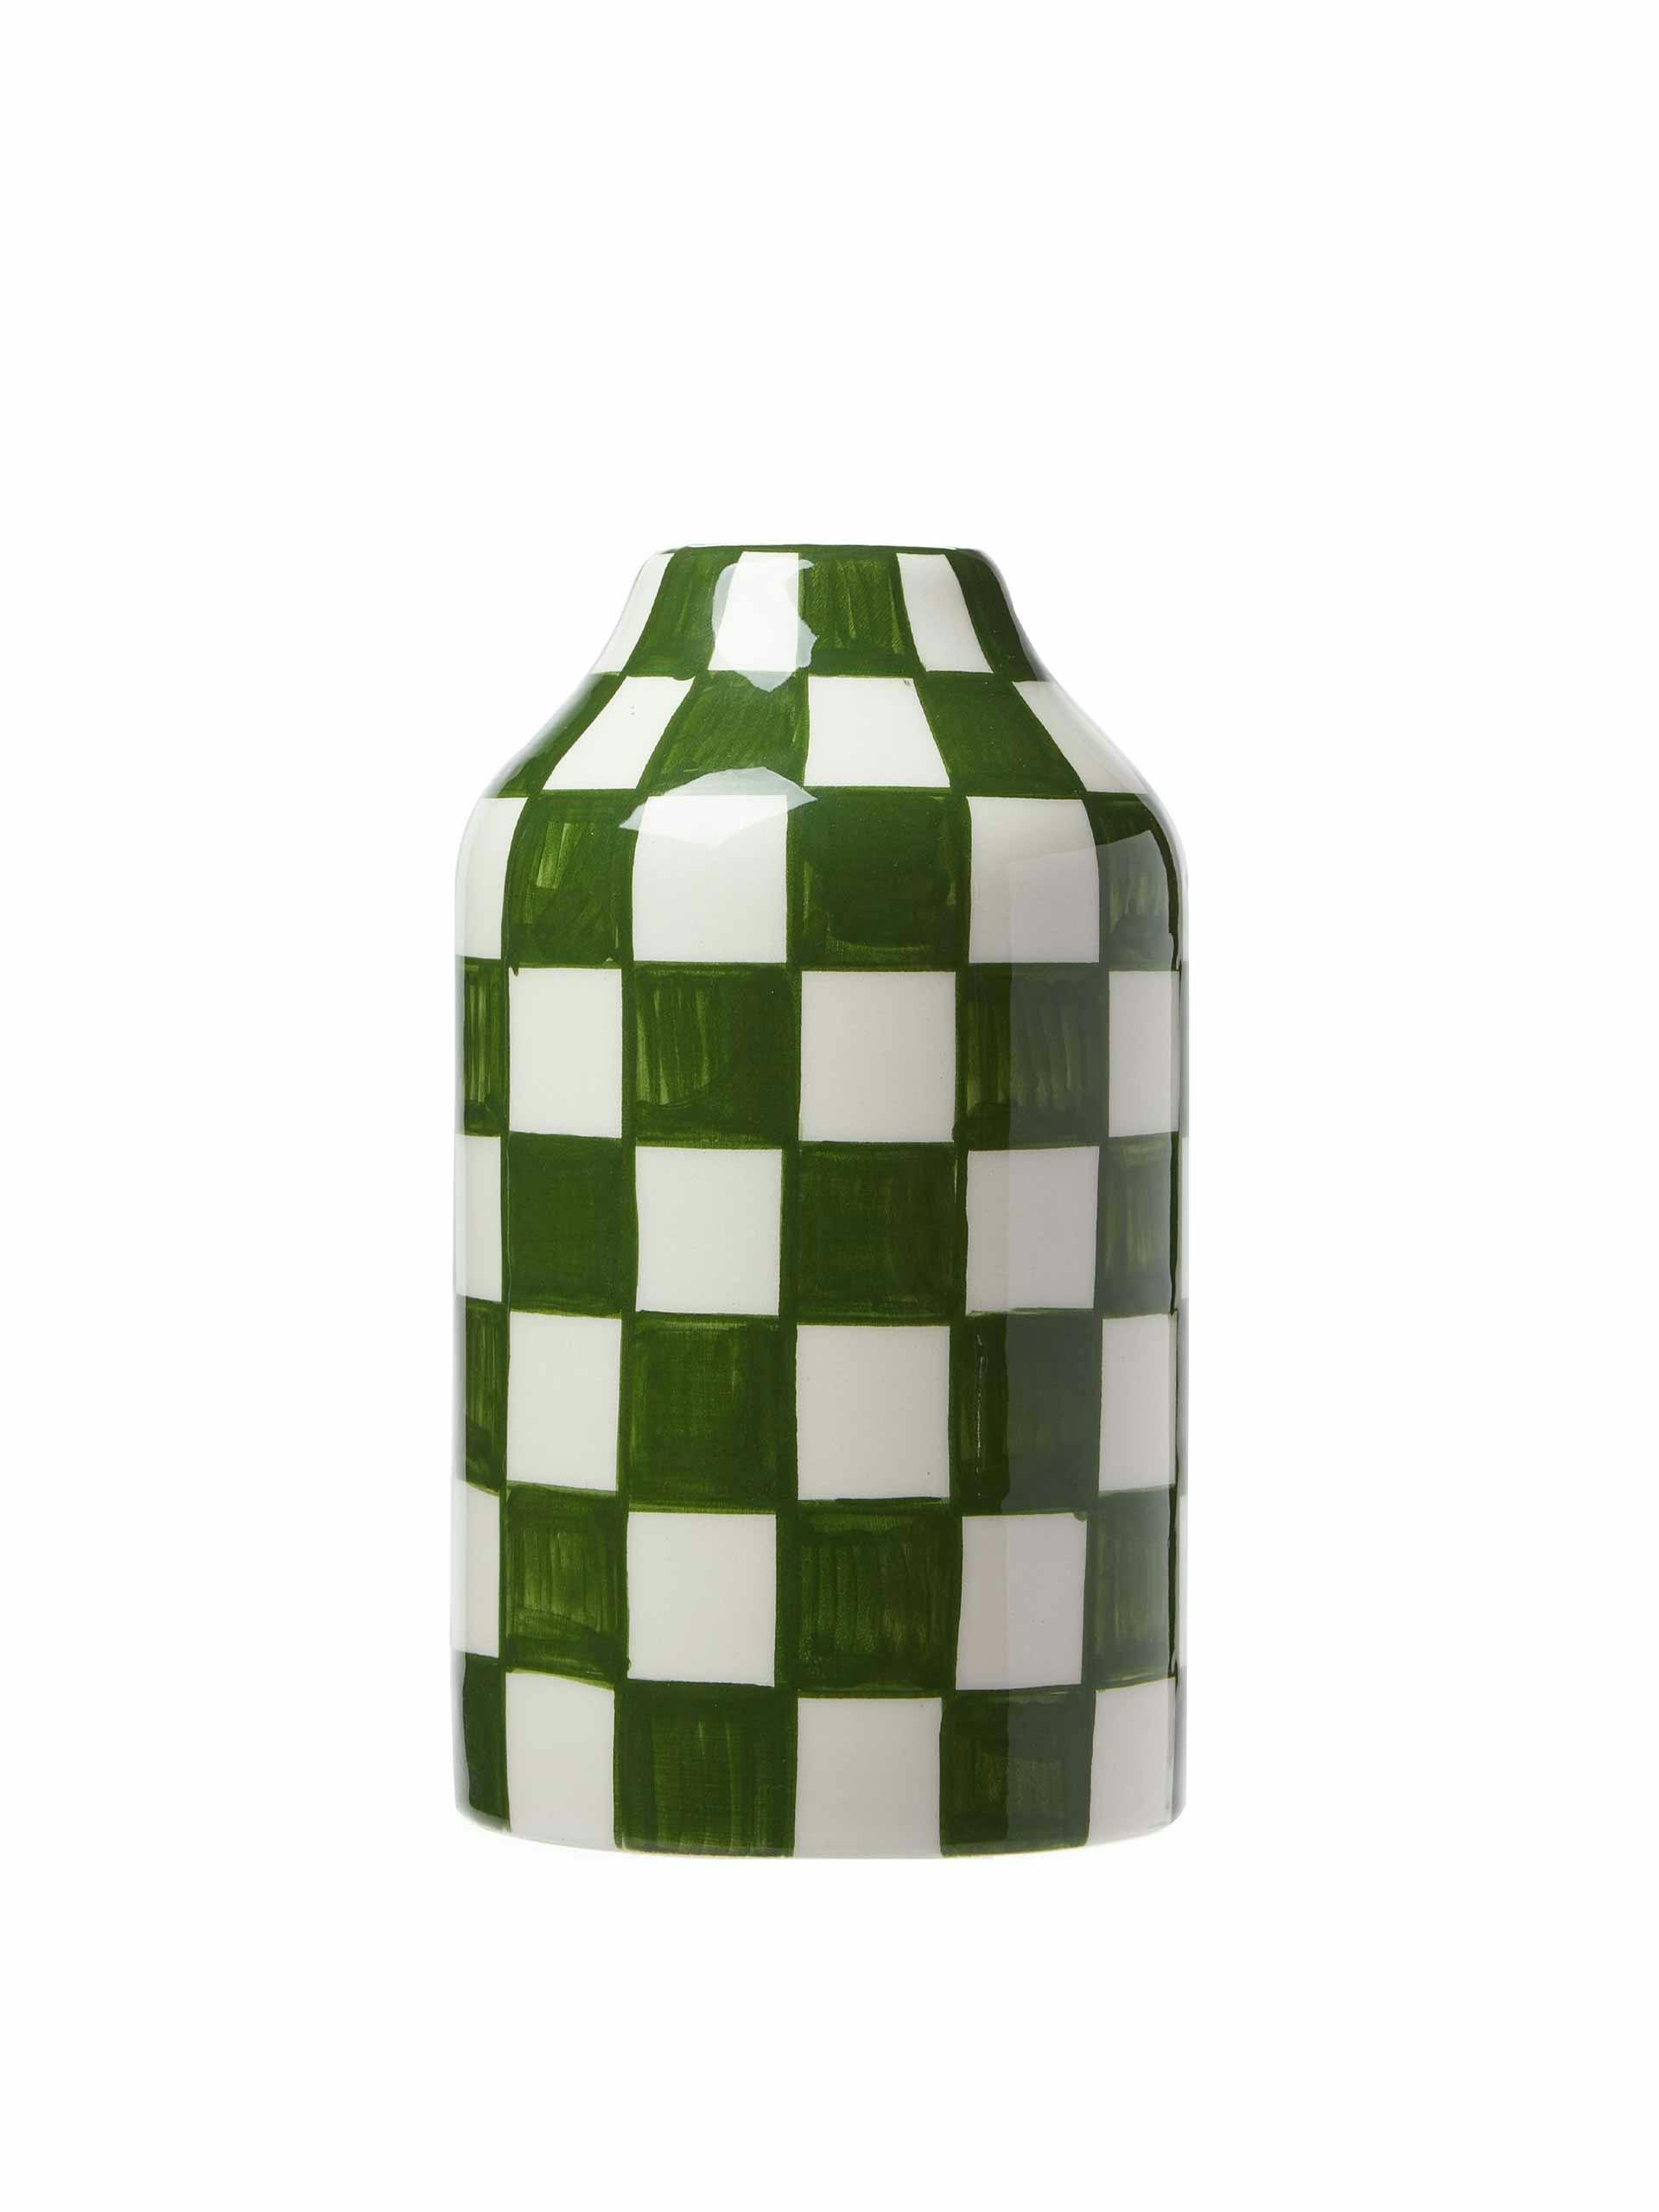 Green and white chequered vase